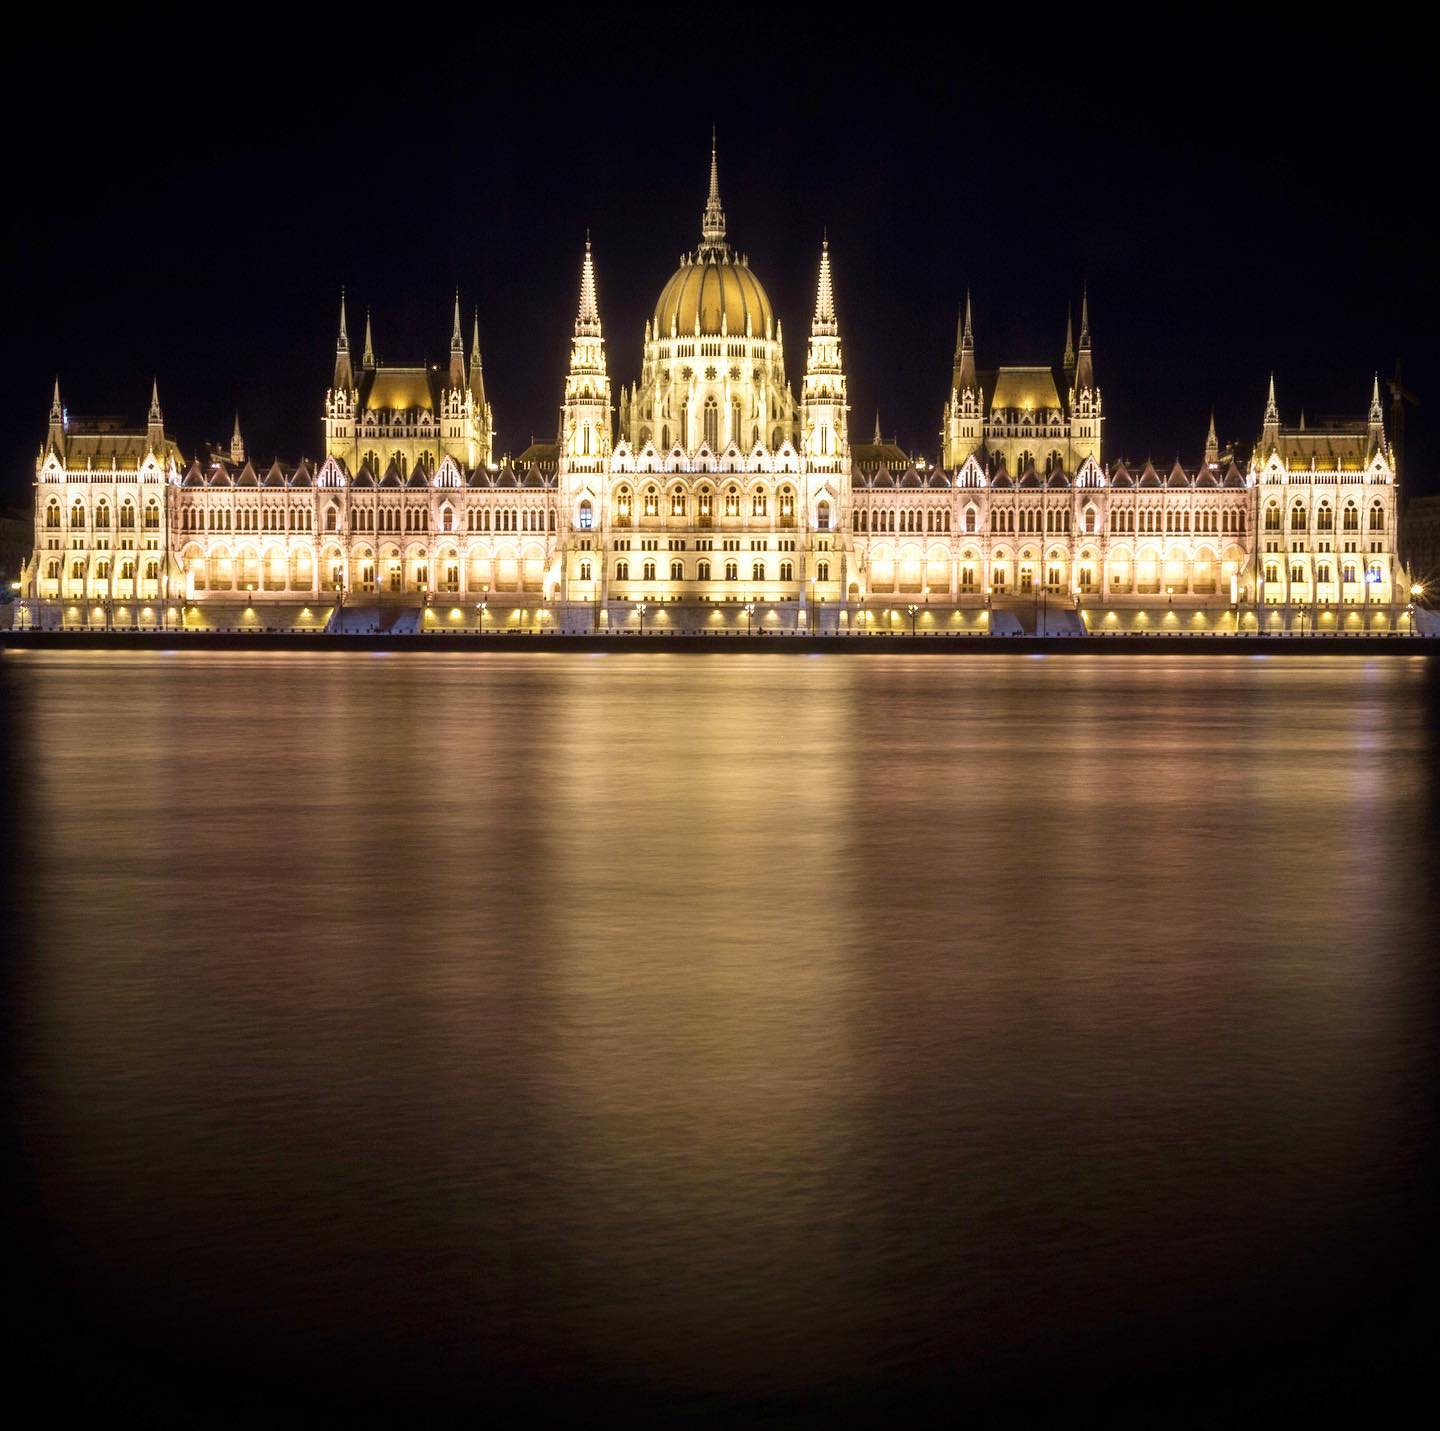 I love this building 😍 the beautiful Parliament of Budapest by night.
.
.
#budapest #hungary #parliament #parliamentbudapest #parliamentofbudapest #europe #TopEuropePhoto #pest #night #longexposure #lighttrail #lighttrails #parliament #bridge #pestbynight #wonderful_places #travelblogger #travelling #travelphotography #travelgram #budapesthungary #budapestgram #bonjourbonvoyage #NIGHTSHOOTERS #budapesttravel #thebestravelgetaway #rsa_night #nightphotos #longexposures #longexposure